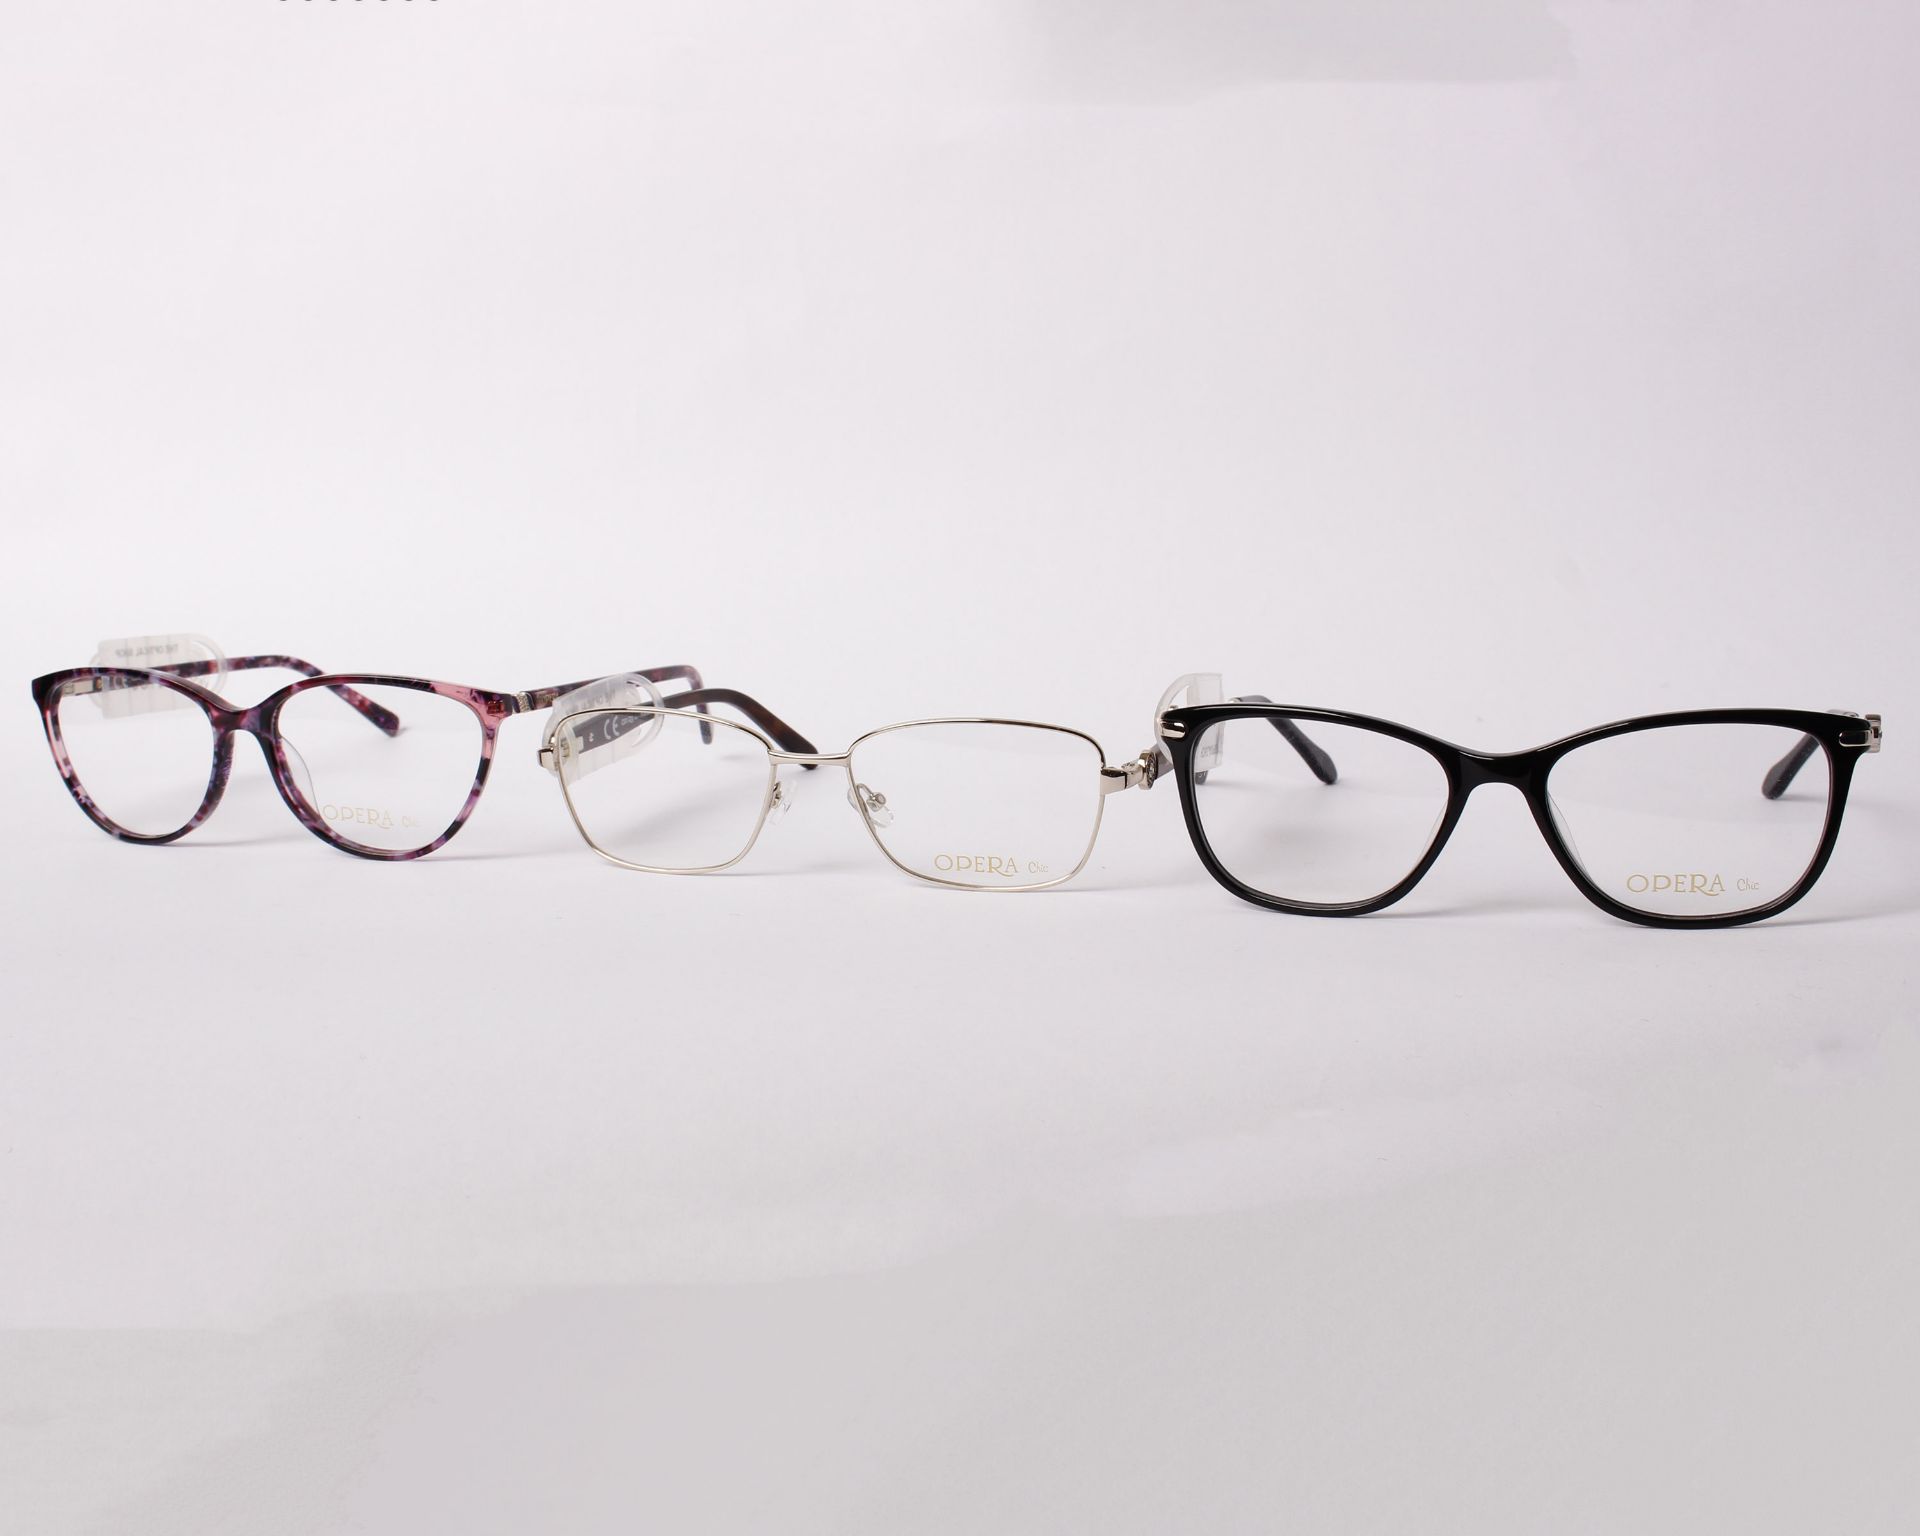 Three pairs of as new Opera glasses frames with clear glass (RRP £110 and £130). - Image 2 of 3